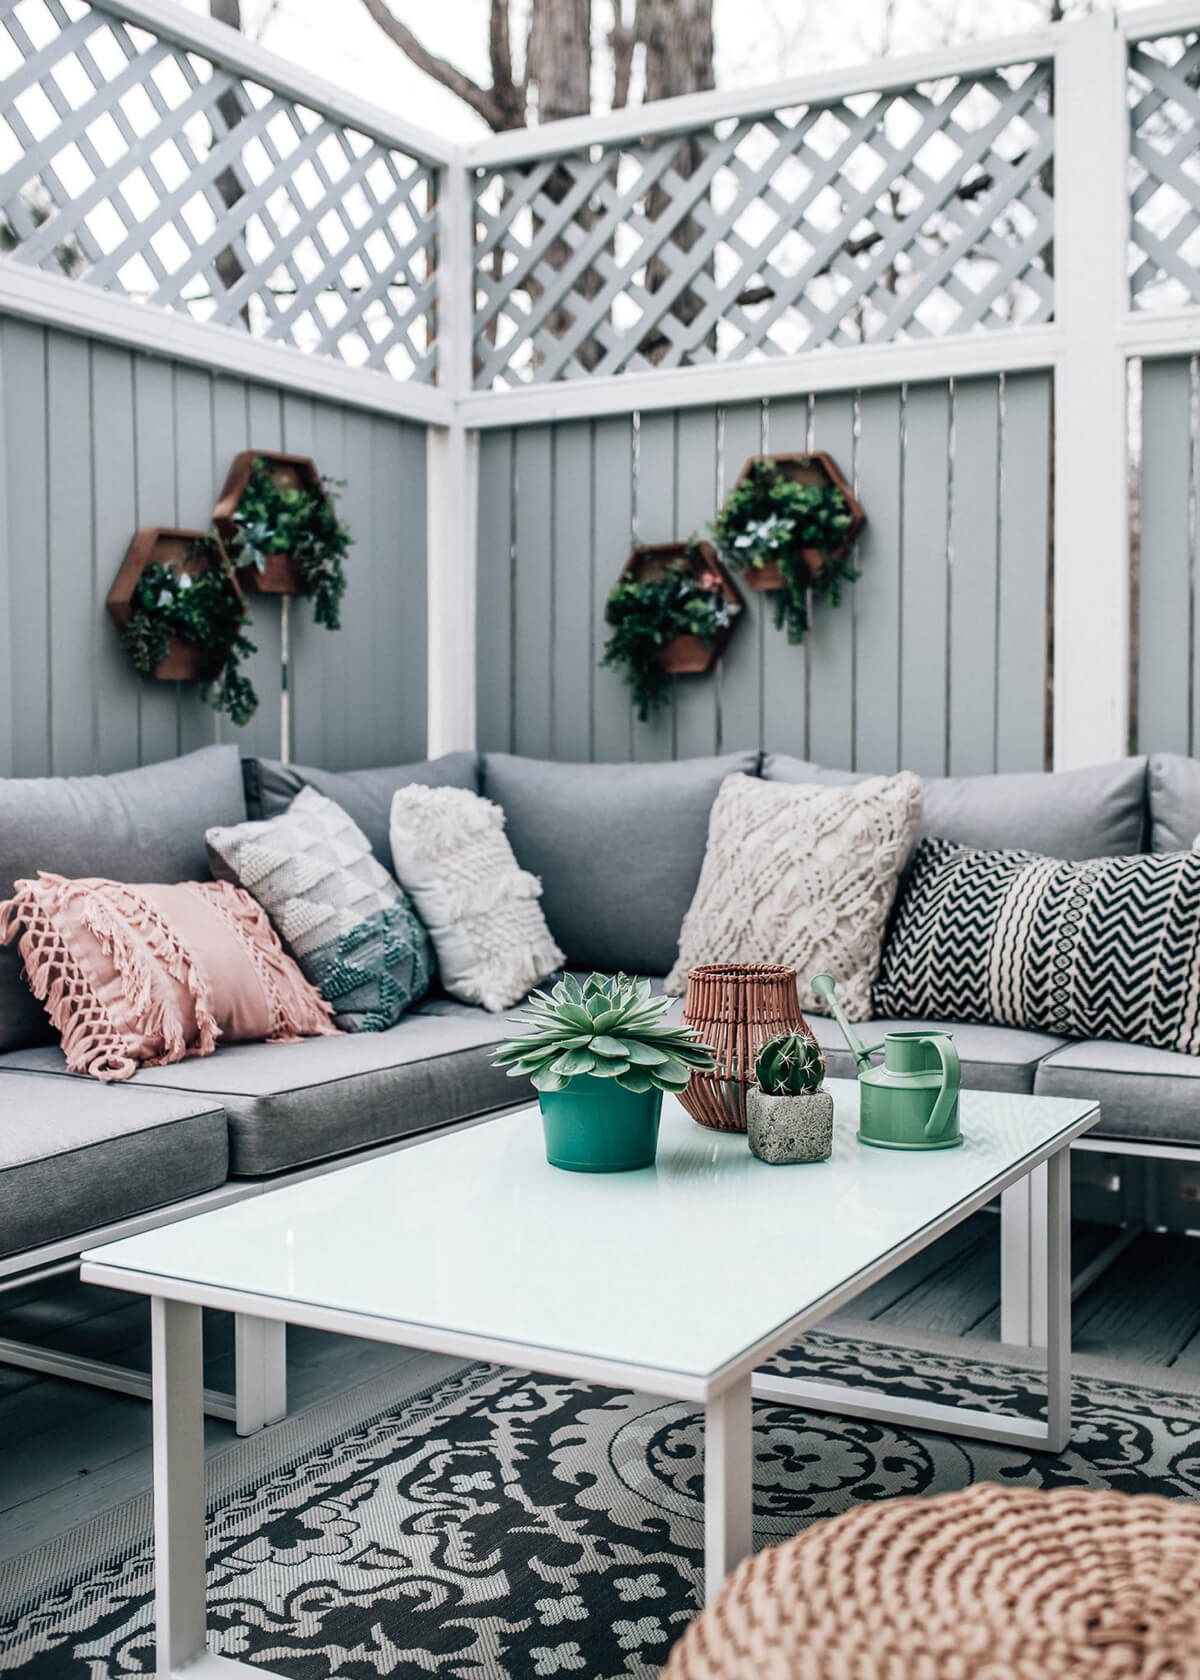 24 Best Outdoor Sitting Area Ideas to Bring Your Space ...